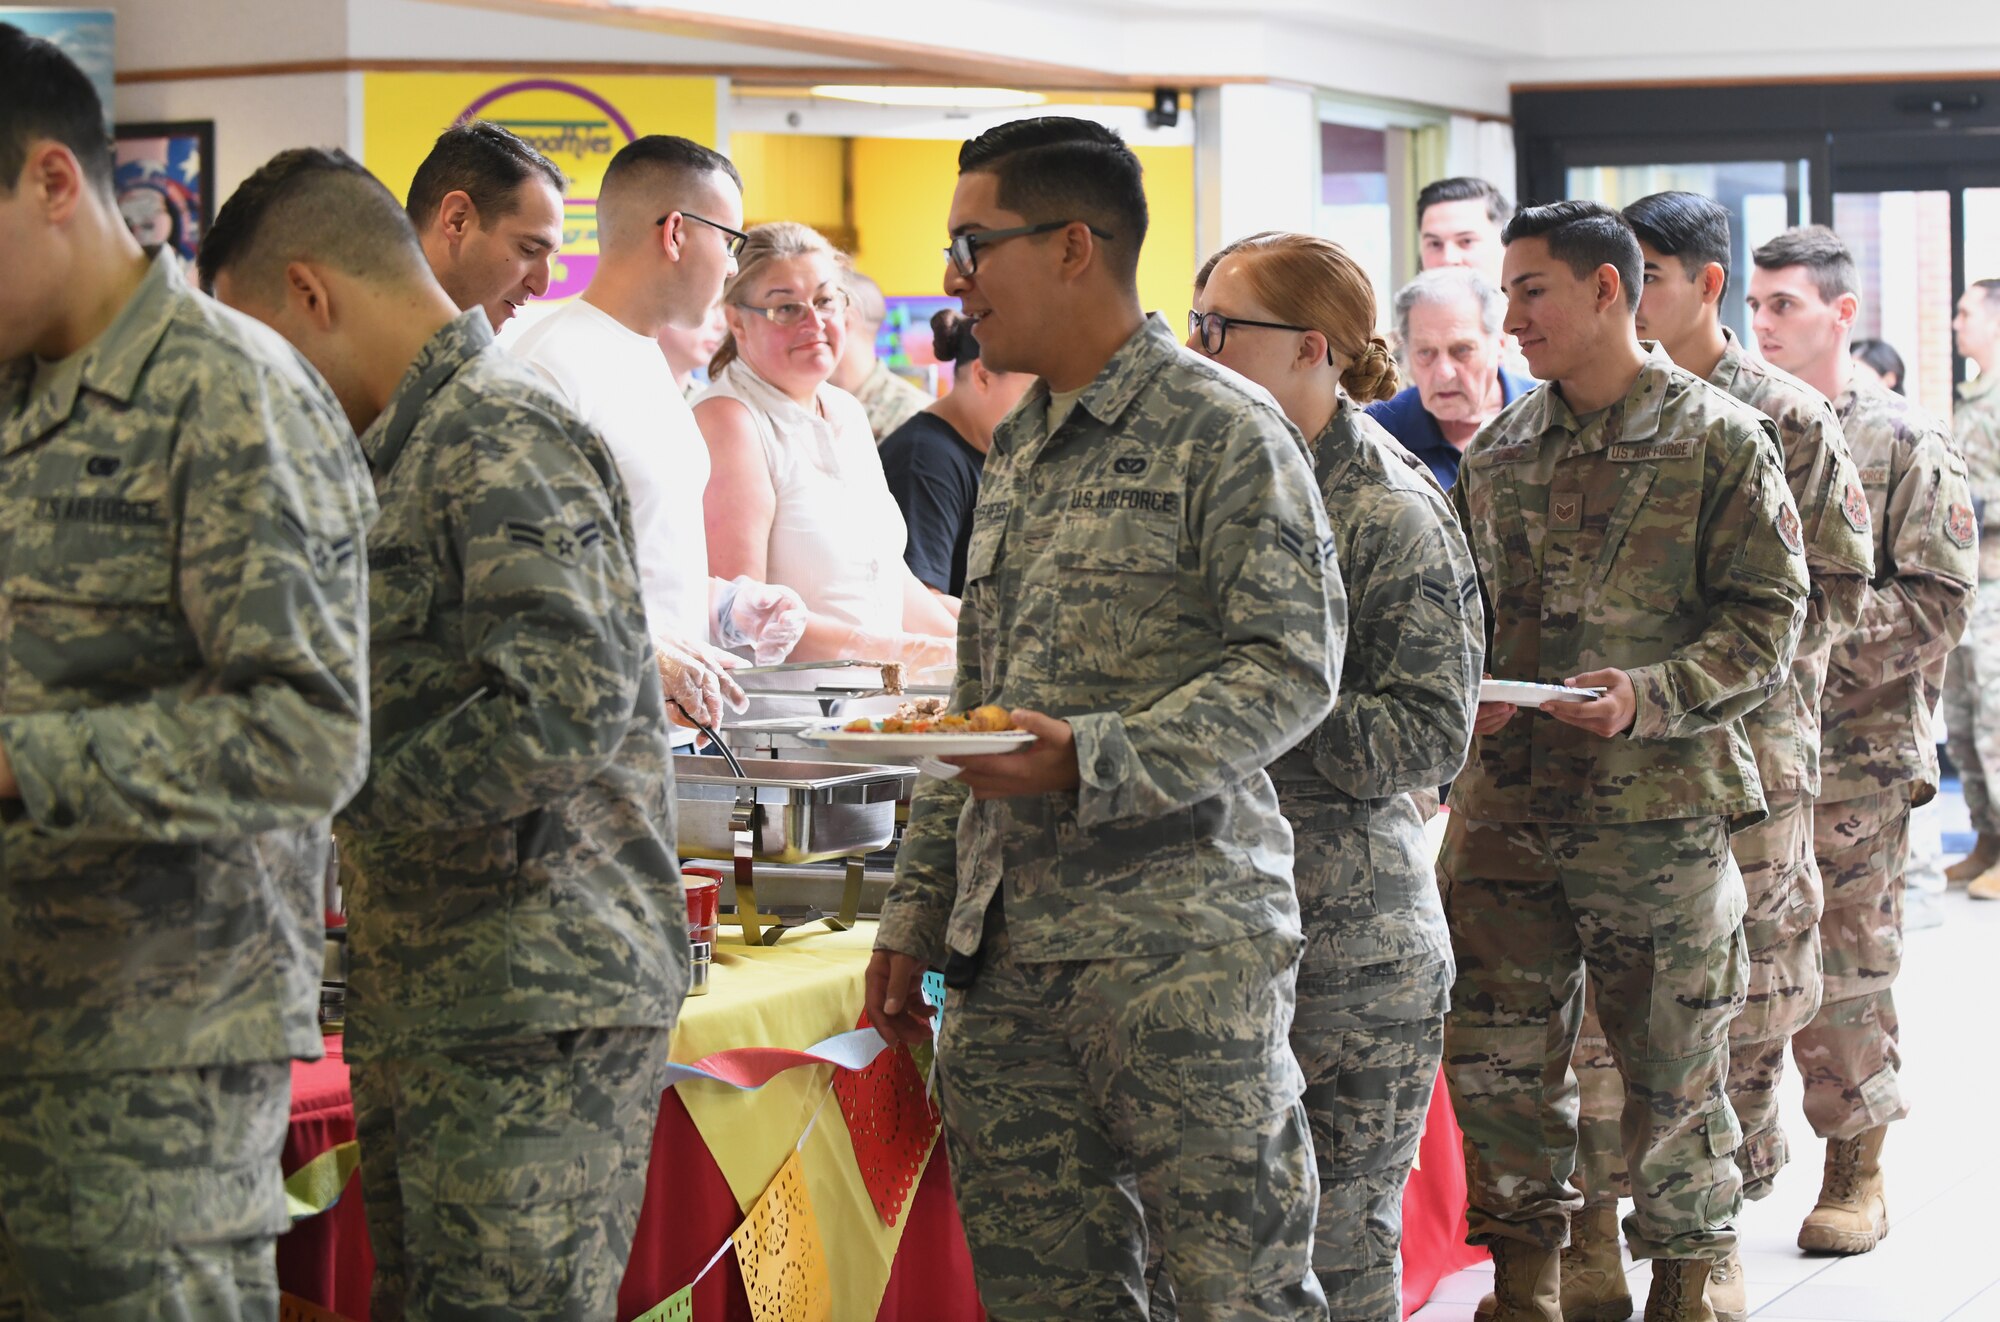 Airmen line up at the ‘Taste of Latin America’ food tasting event, held at the Base Exchange food court, on Ellsworth Air Force Base, S.D., Sept. 16, 2019. The food tasting included authentic dishes from Colombia, Mexico, Cuba and Puerto Rico. The event was hosted and catered by members of the Ellsworth Latin American Community (ELAC). (U.S. Air Force photo by Airman 1st Class Christina Bennett)